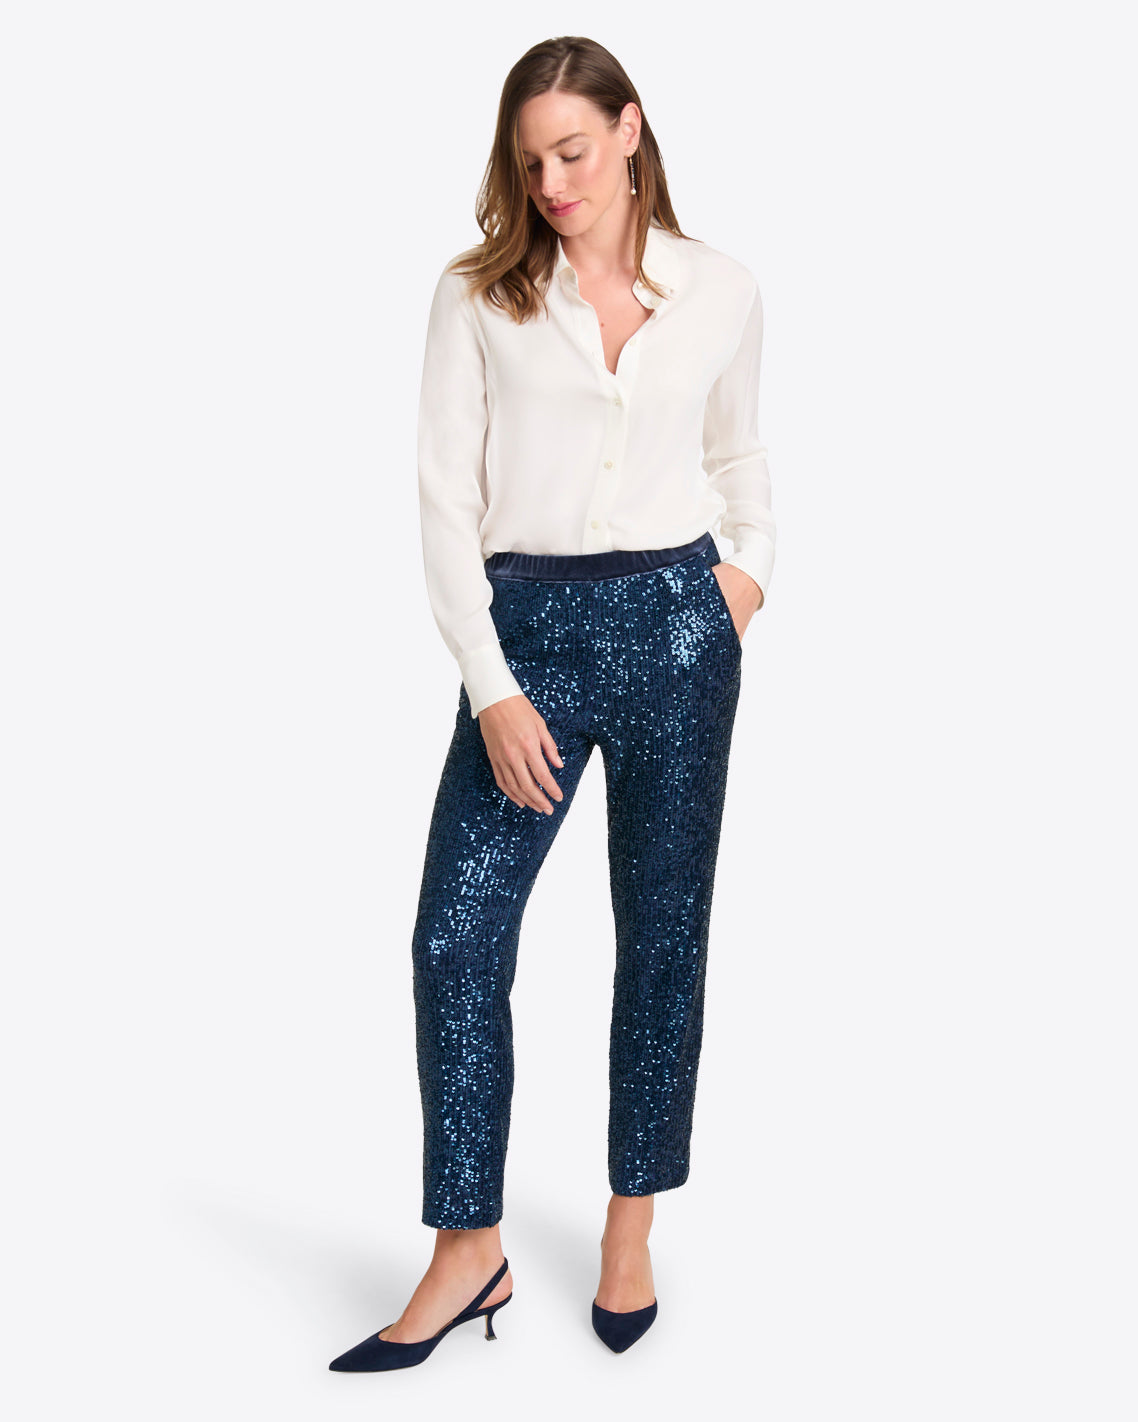 Pull on Pants in Sequins